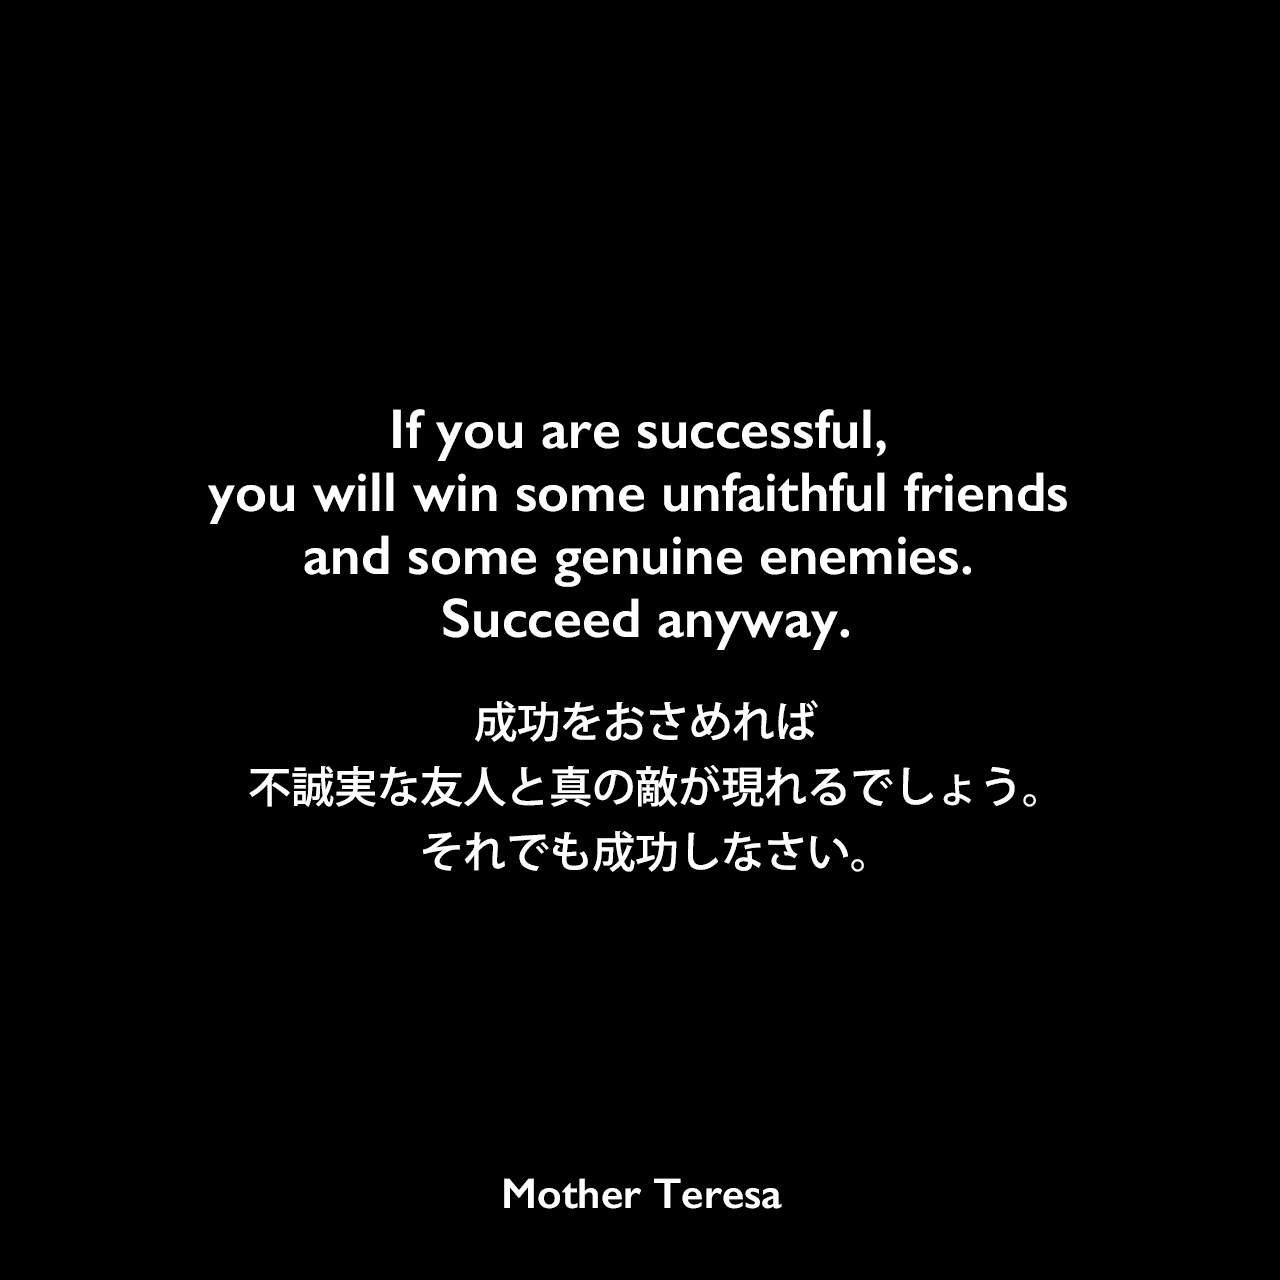 If you are successful, you will win some unfaithful friends and some genuine enemies. Succeed anyway.成功をおさめれば、不誠実な友人と真の敵が現れるでしょう。それでも成功しなさい。Mother Teresa